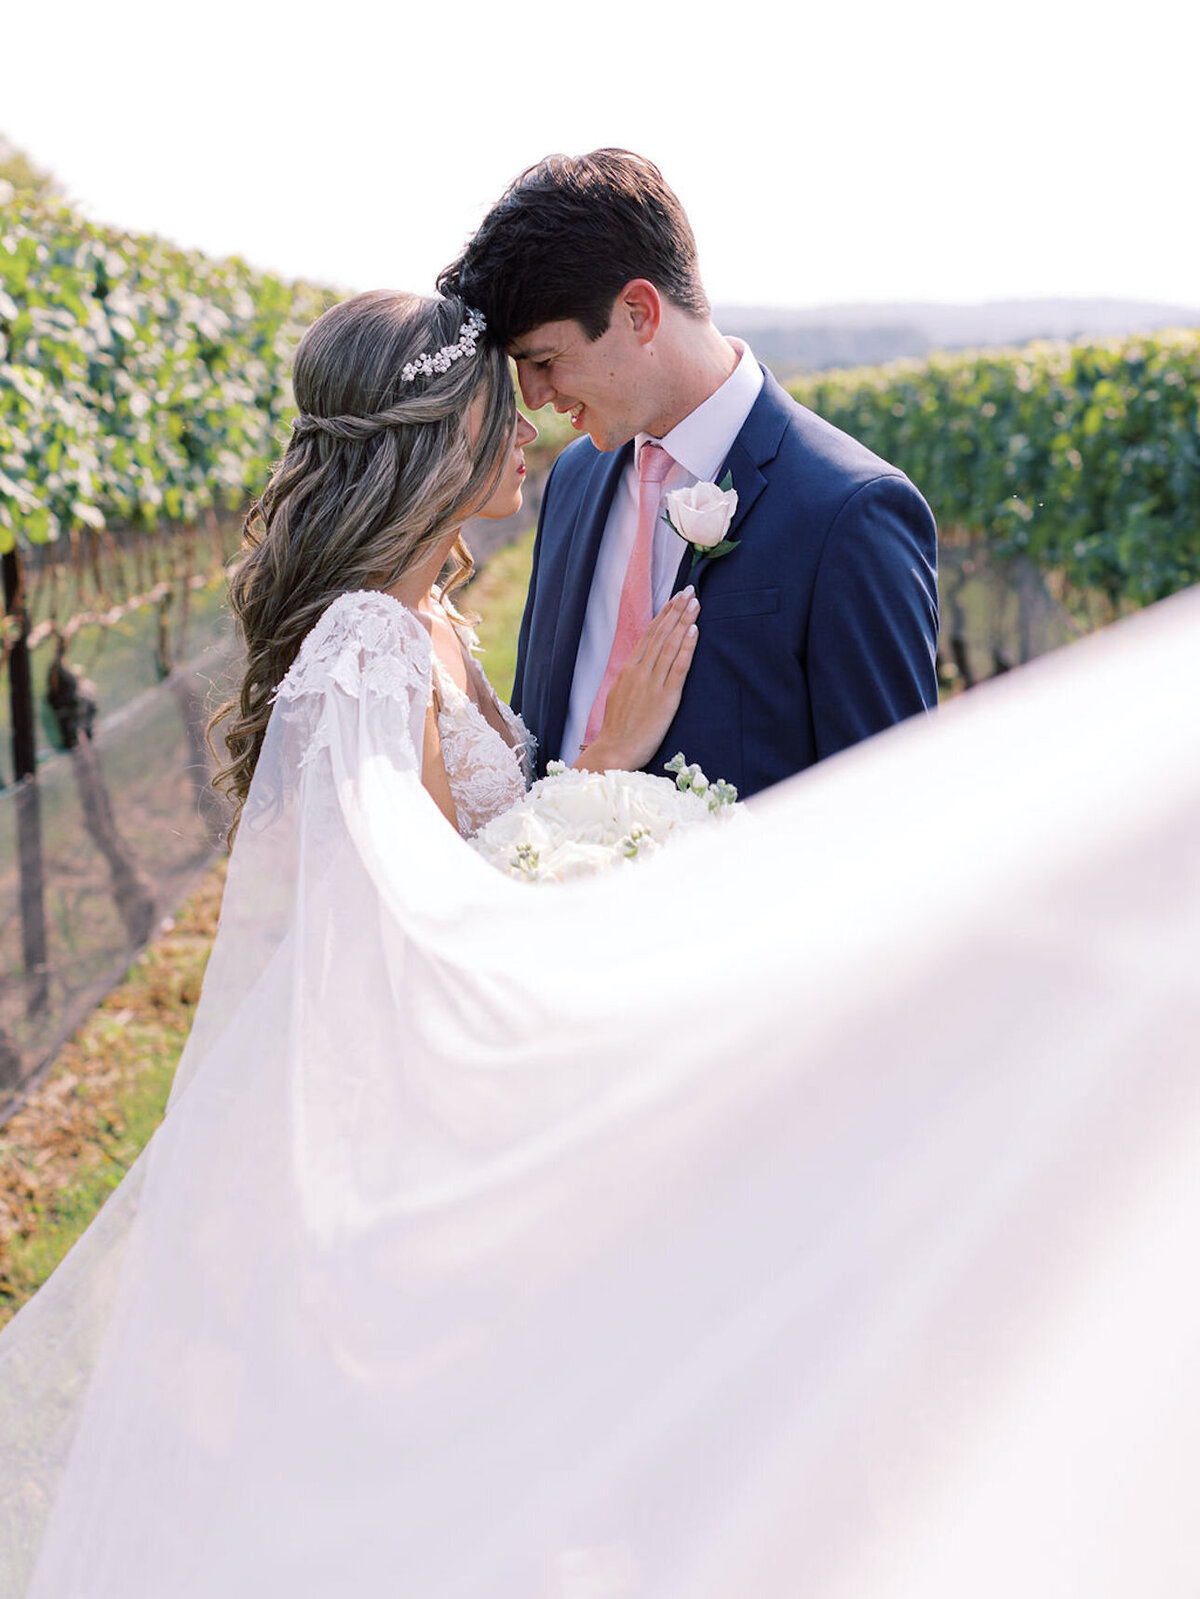 Megan-Brandon-Stone-Tower-Winery-Wedding-The-finer-points-event-planning-Kir2ben-photography00023